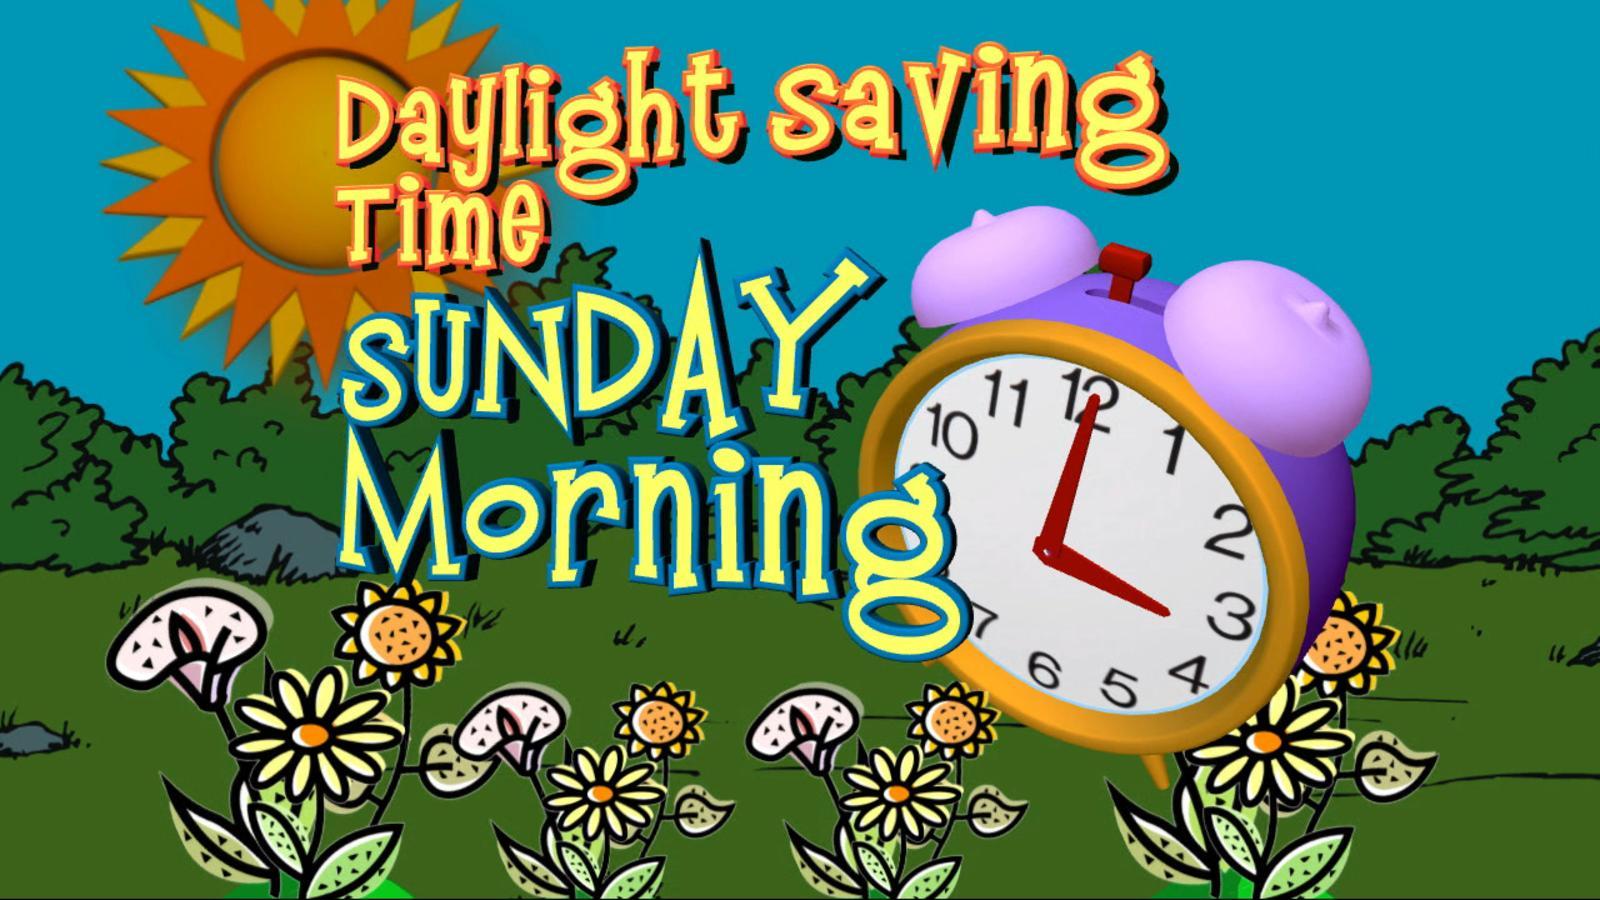 Daylight Saving Time Videos at ABC News Video Archive at abcnews.com